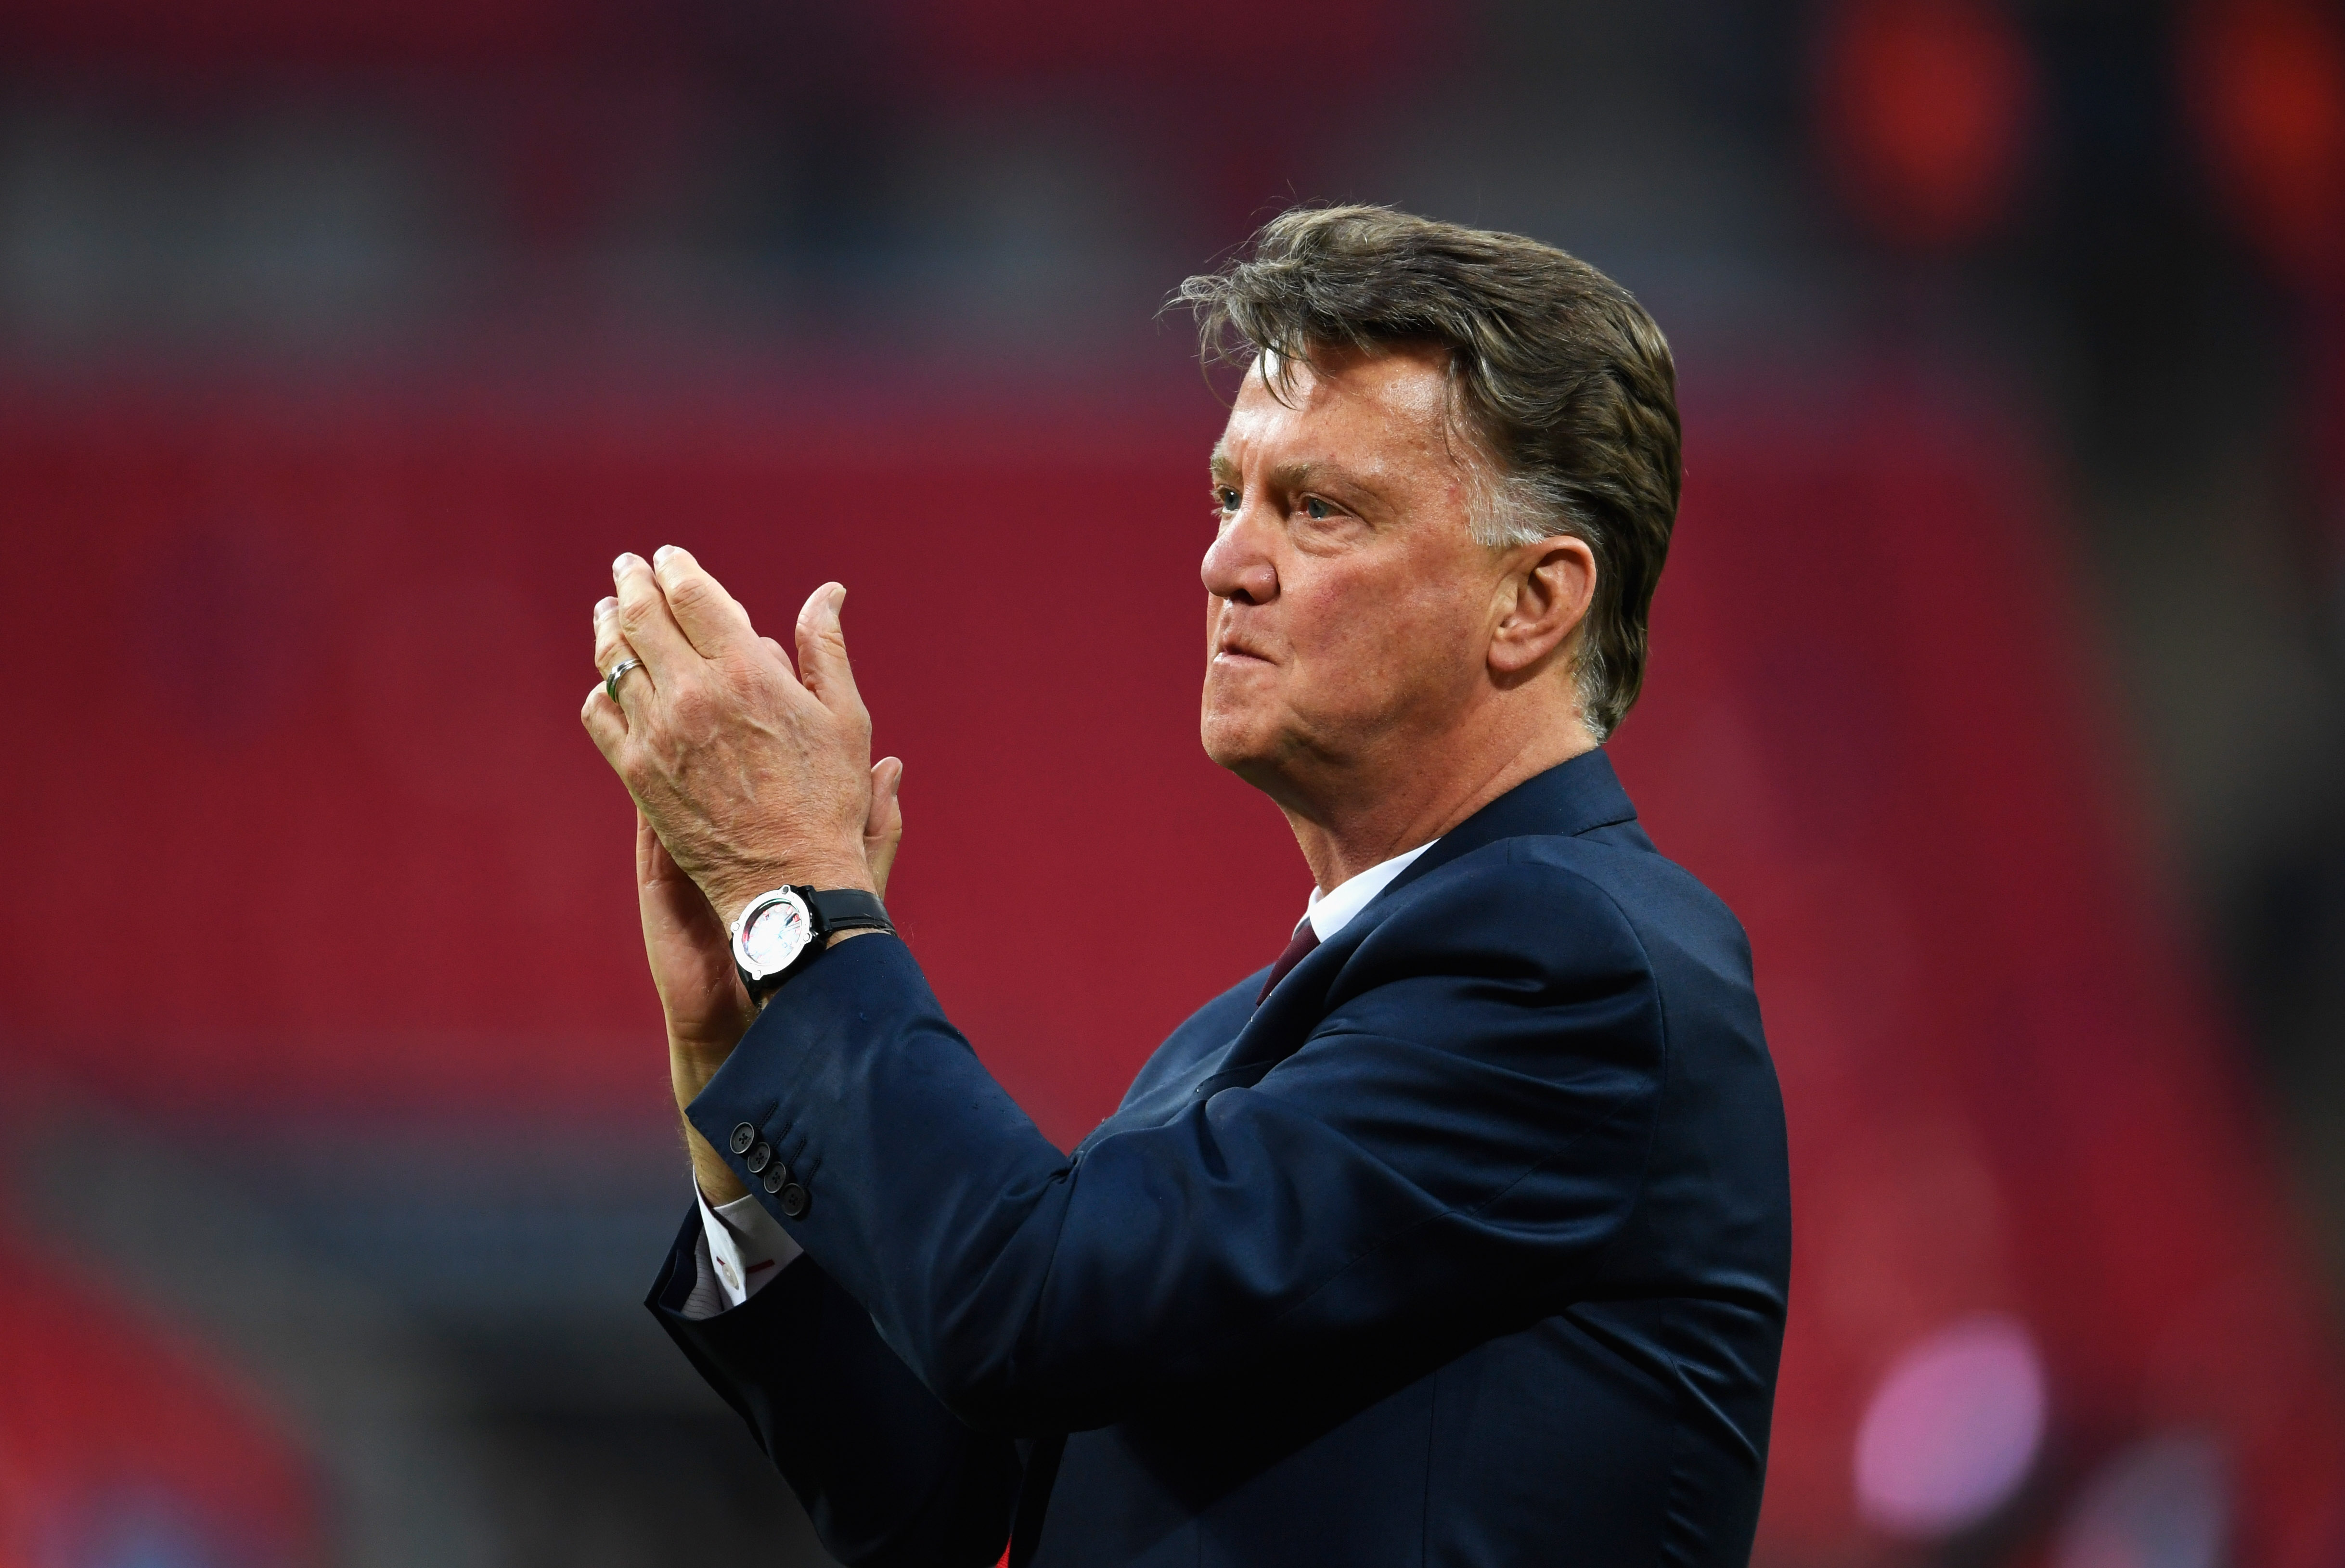 Louis van Gaal will hope to overseen another memorable World Cup campaign with Netherlands. (Photo by Mike Hewitt/Getty Images)